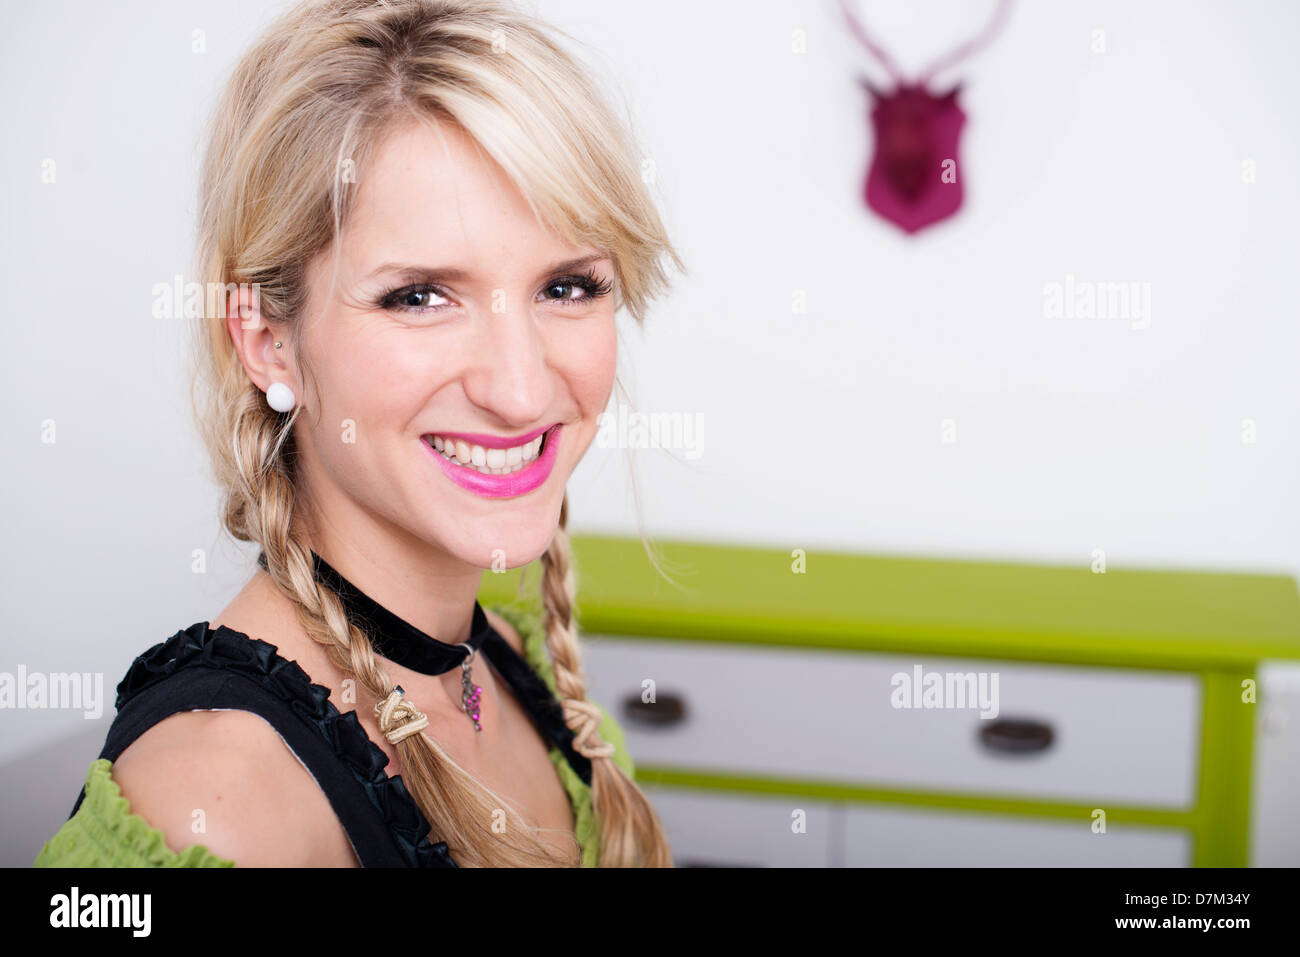 Young woman with traditional bavarian dress, smiling, portrait Stock Photo